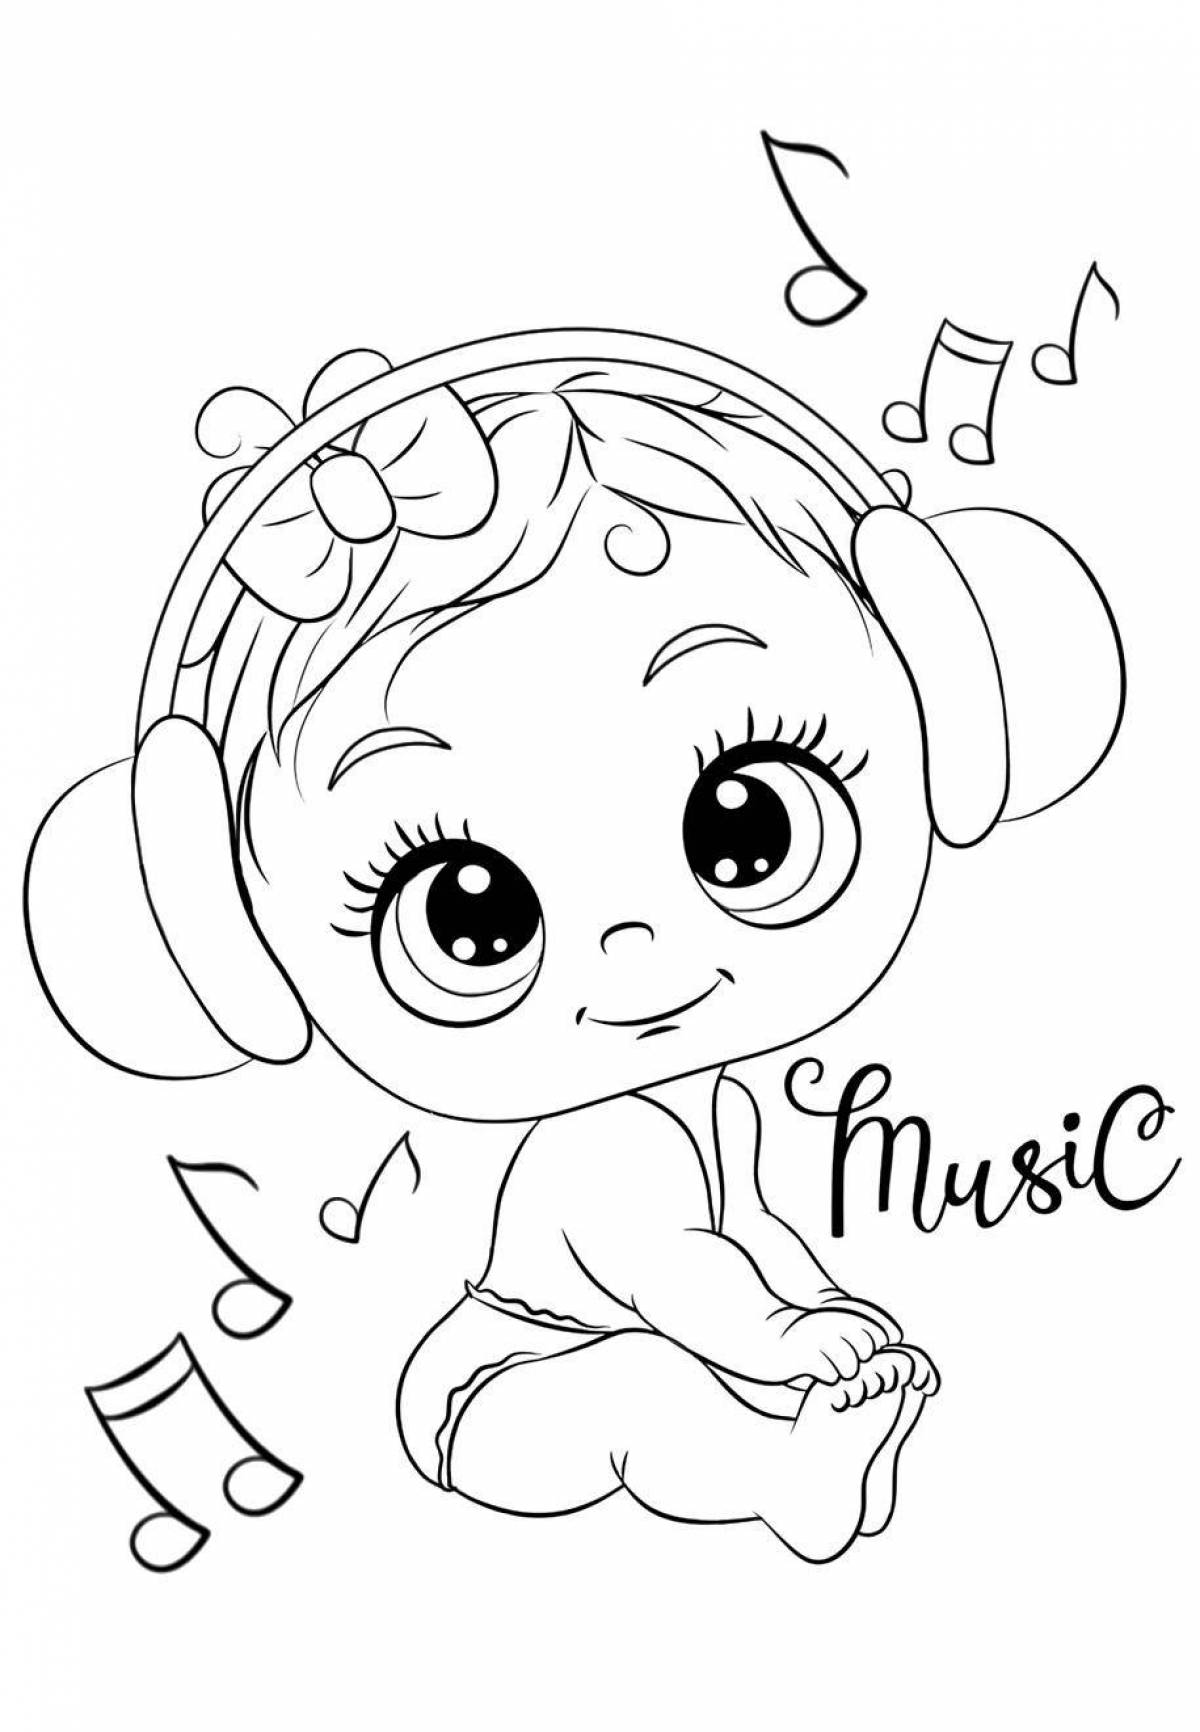 Magic coloring girl with headphones